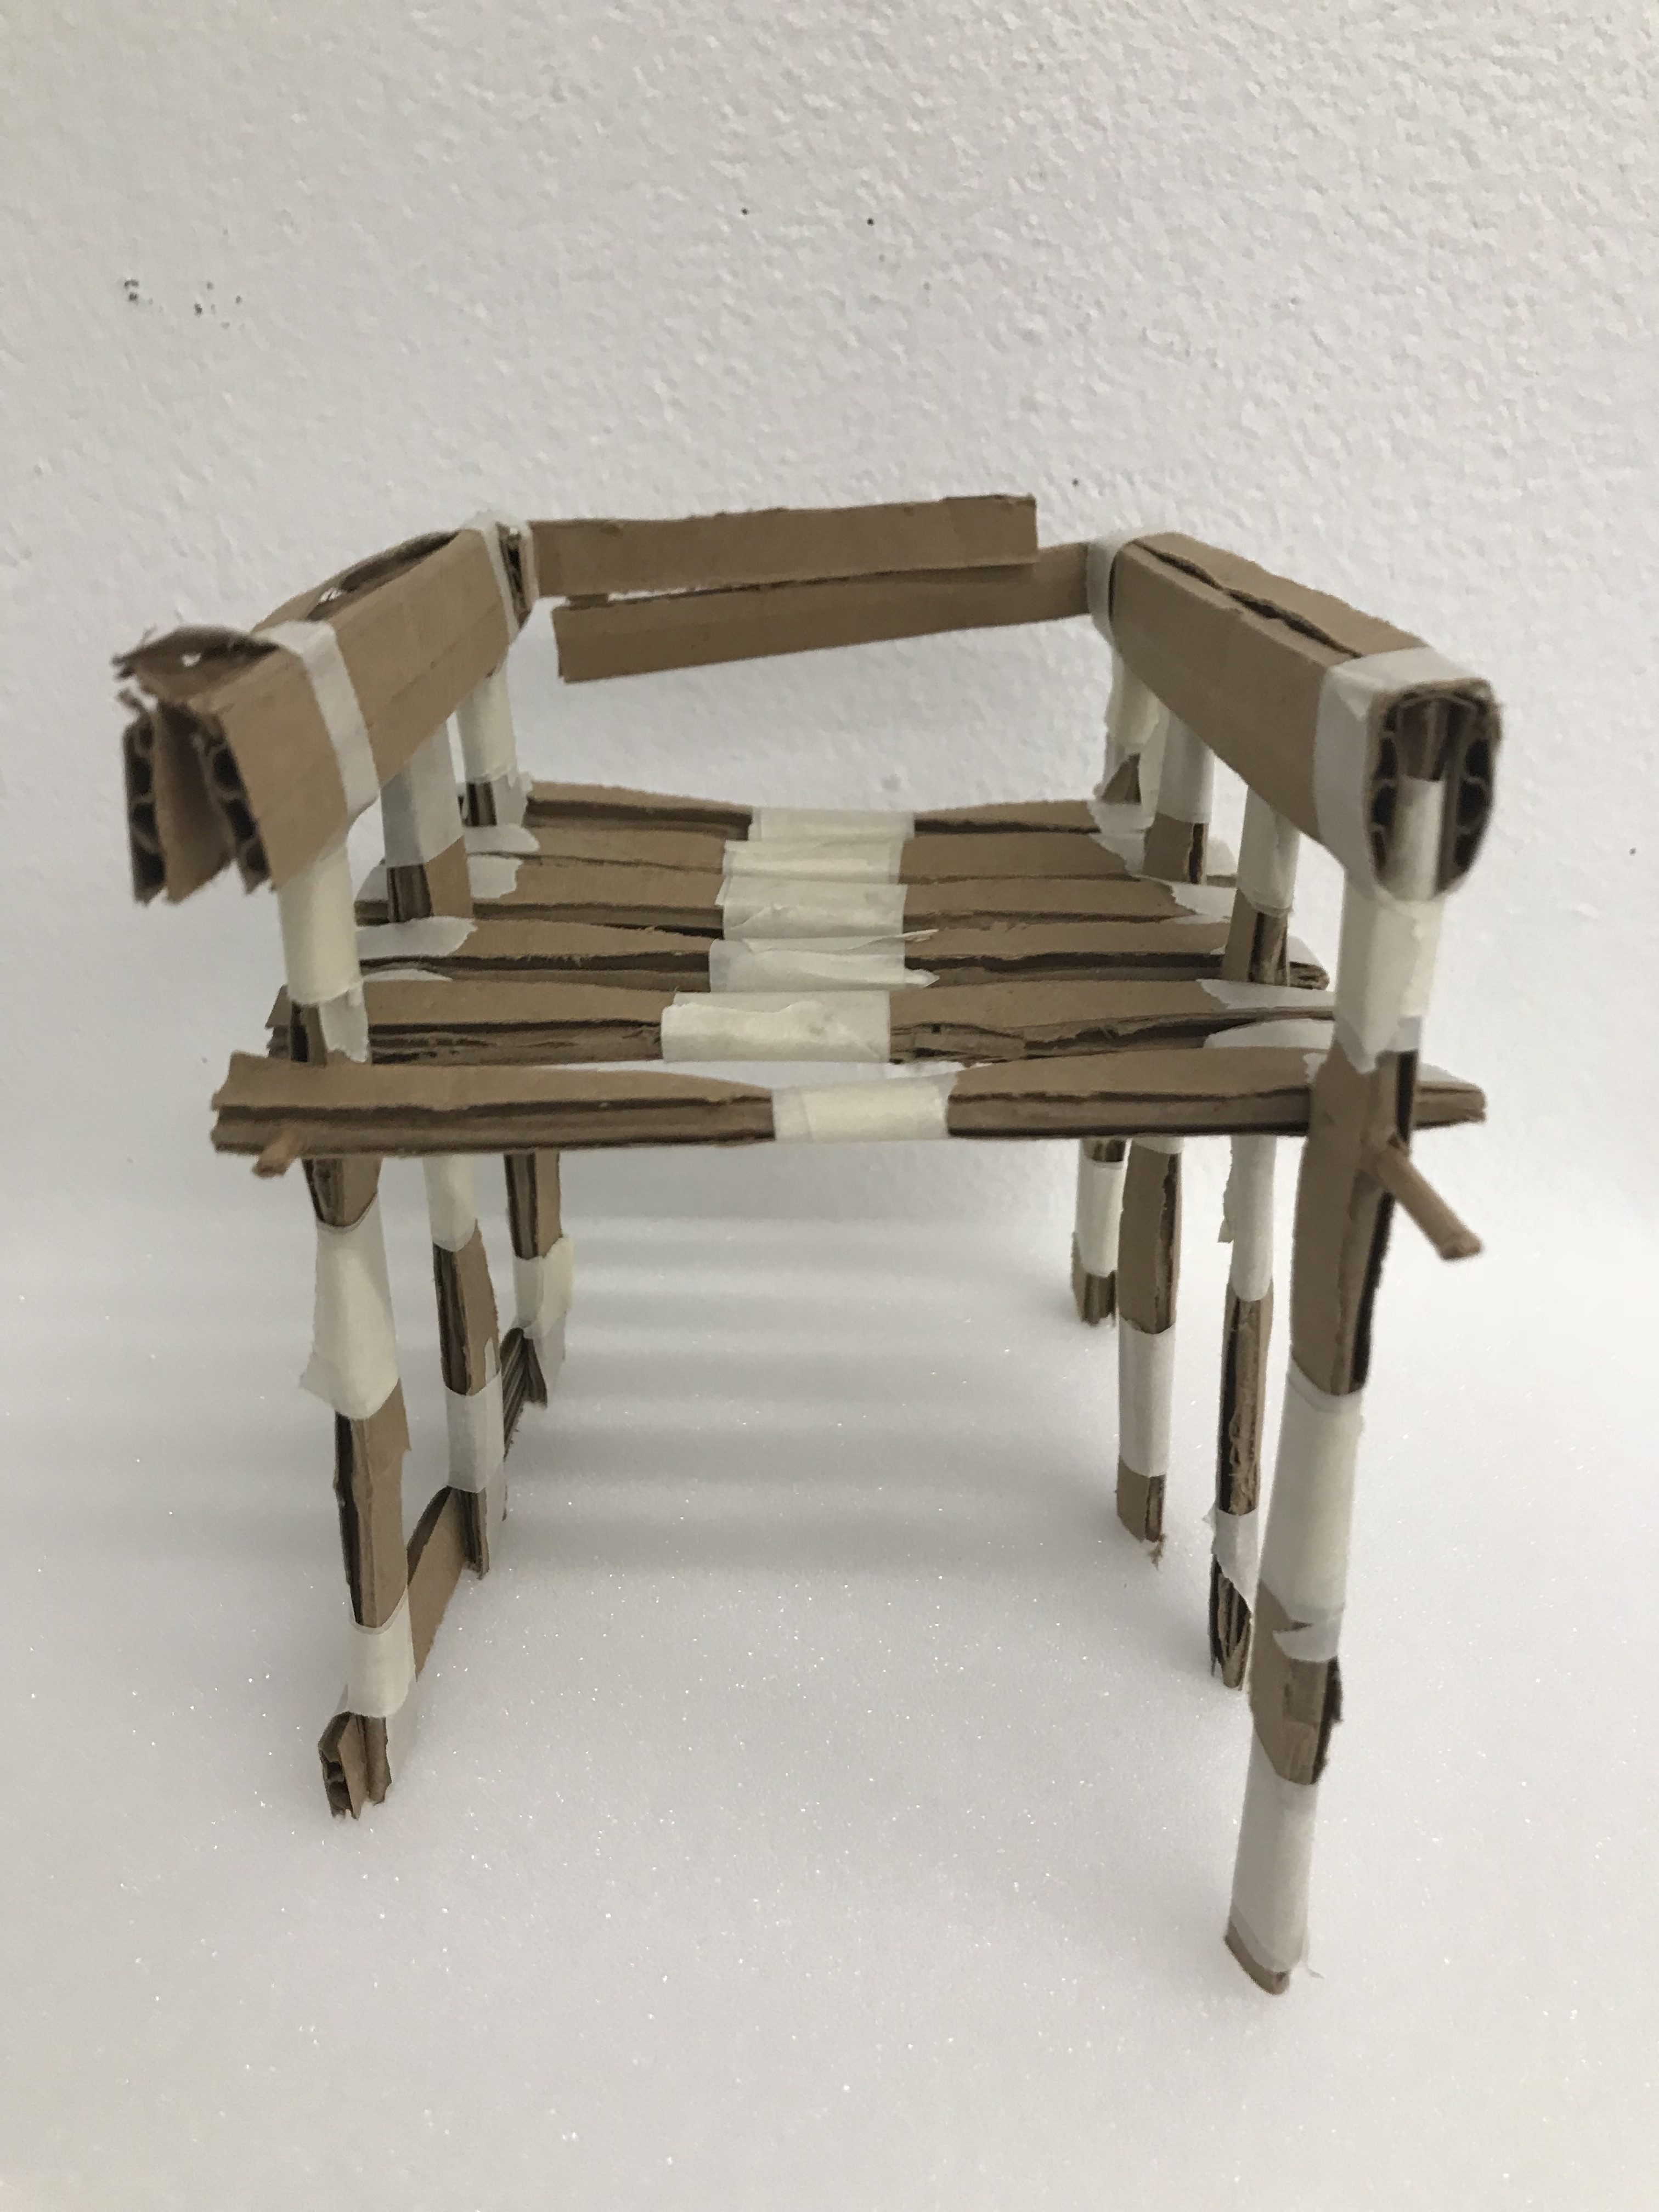 Space & Materiality – Collapsable Chair Project (Process)